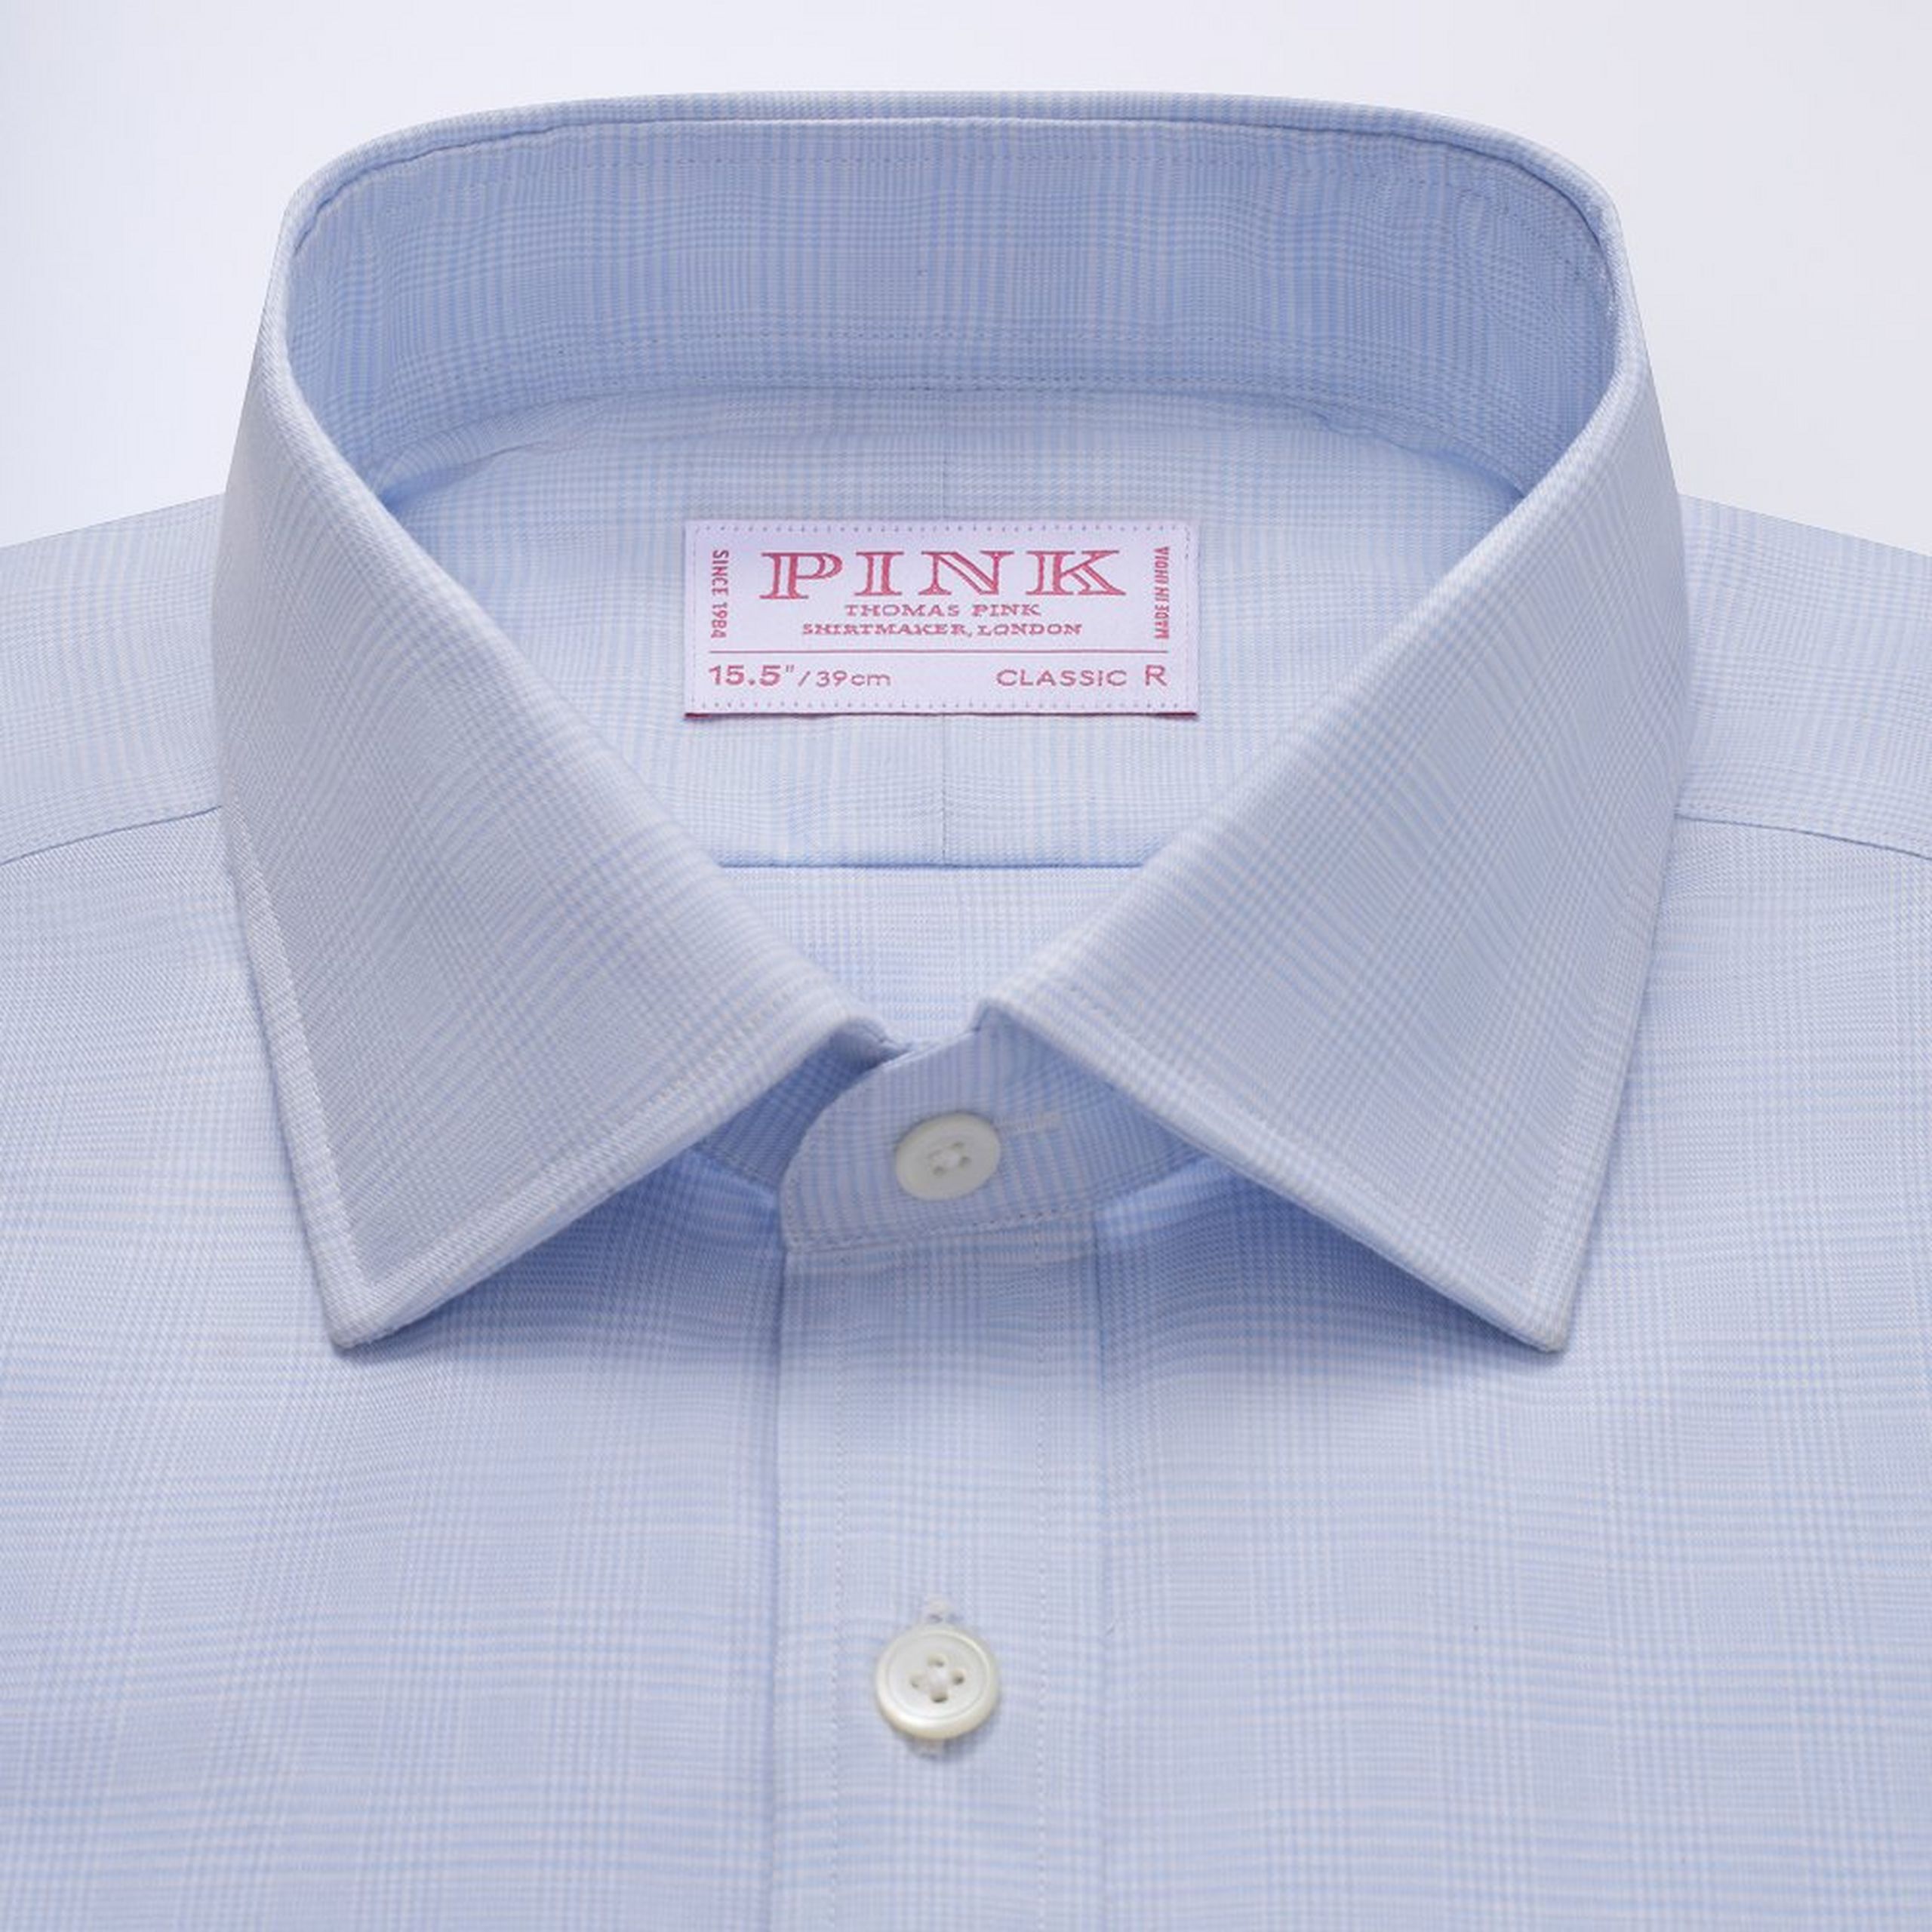 Pale Blue & White Classic Fit Formal Prince of Wales Check Shirt